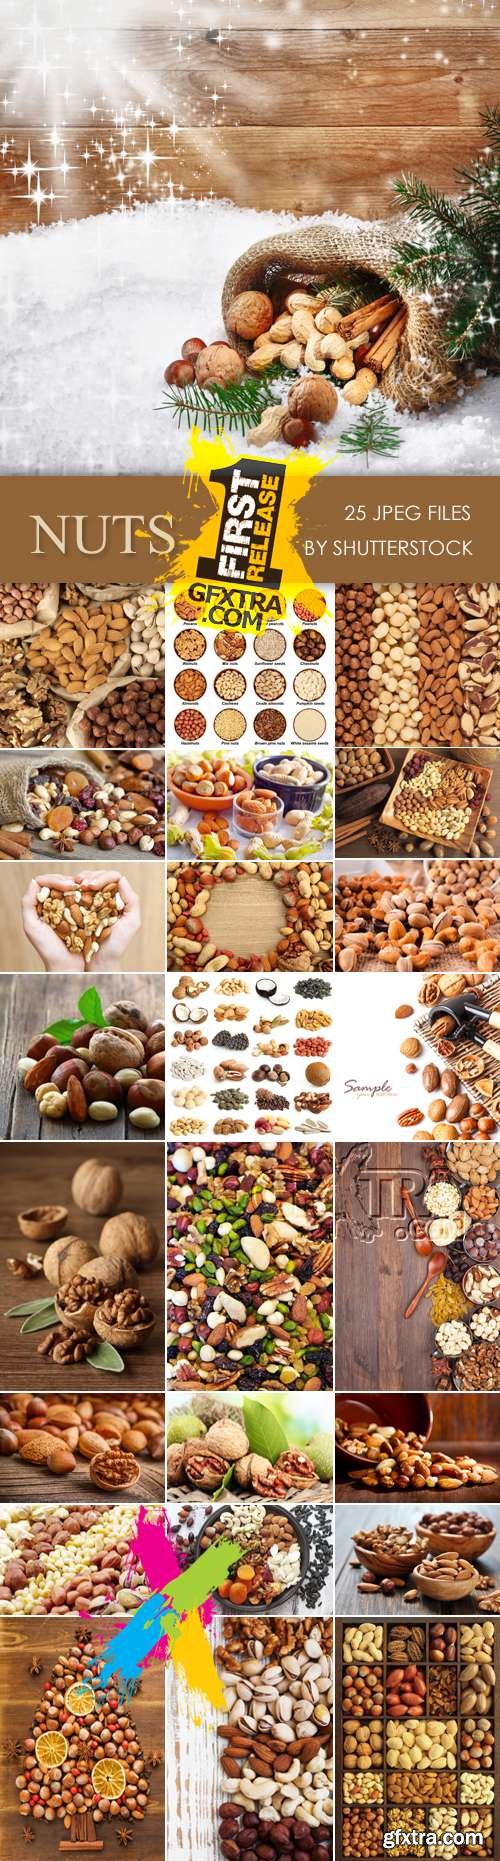 Stock Photo - Various Nuts